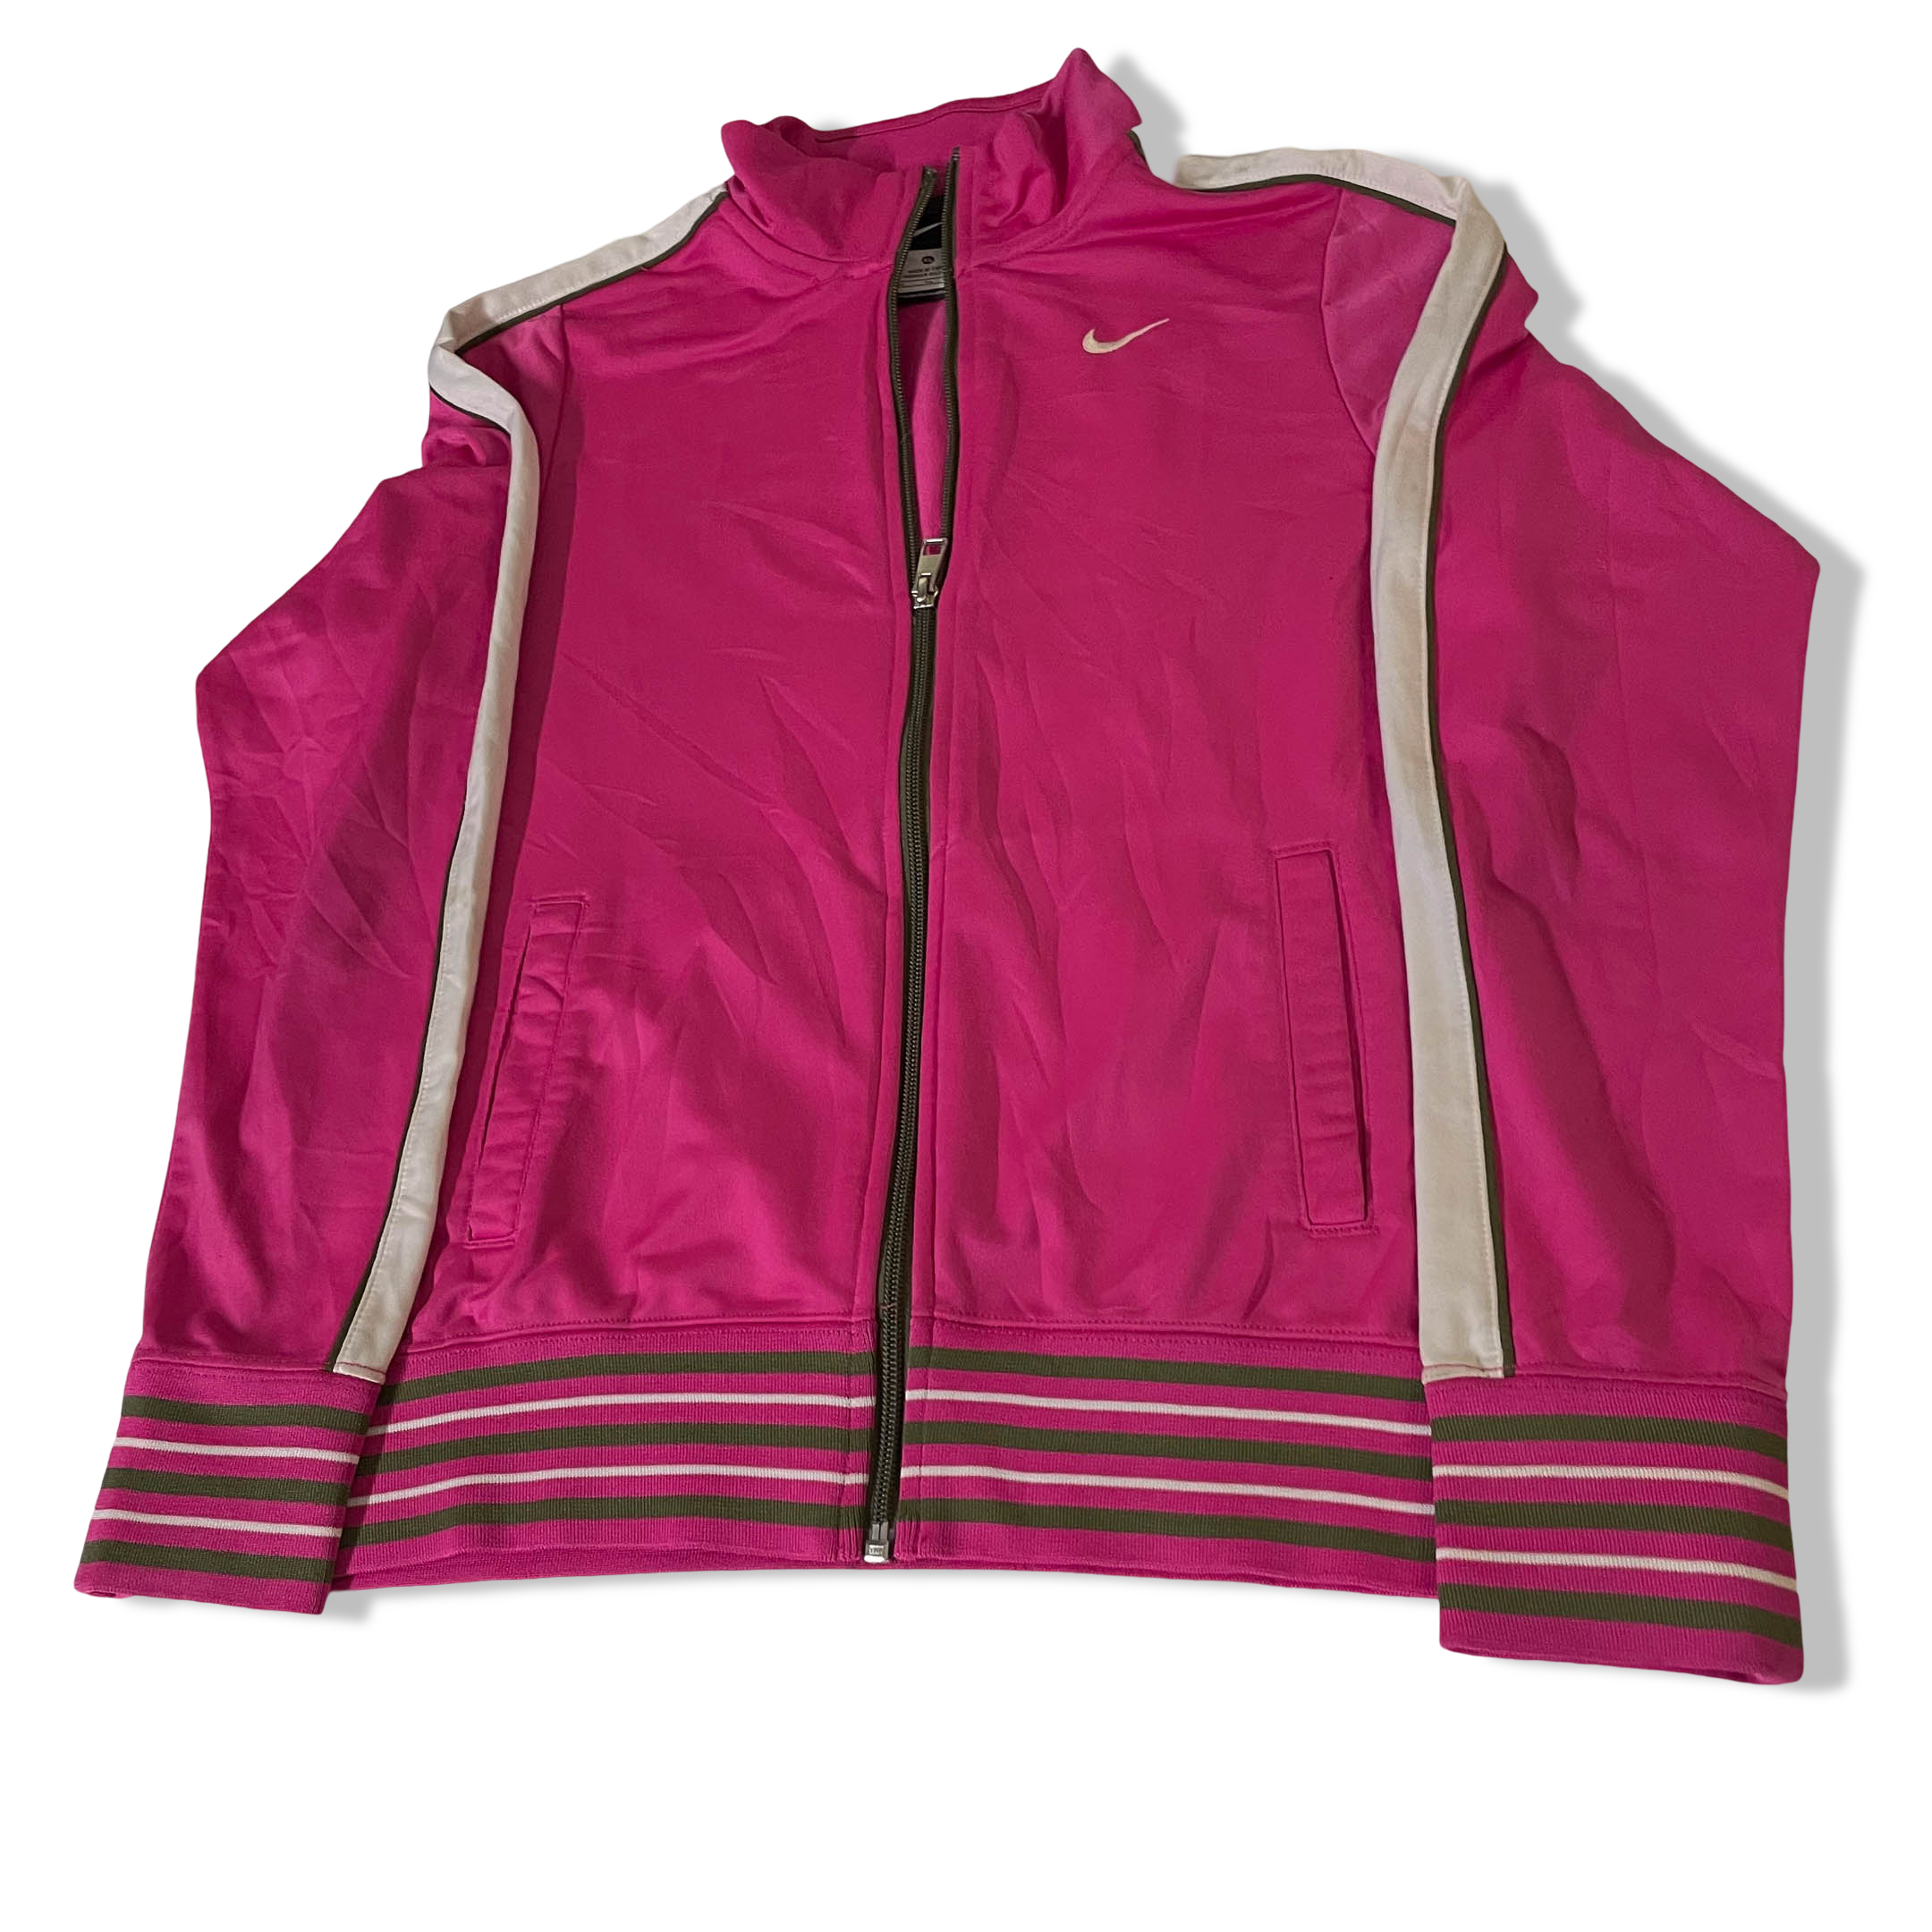 Vintage Nike Women's pink made in China full zip high neck jacket in XL|SKU 3816